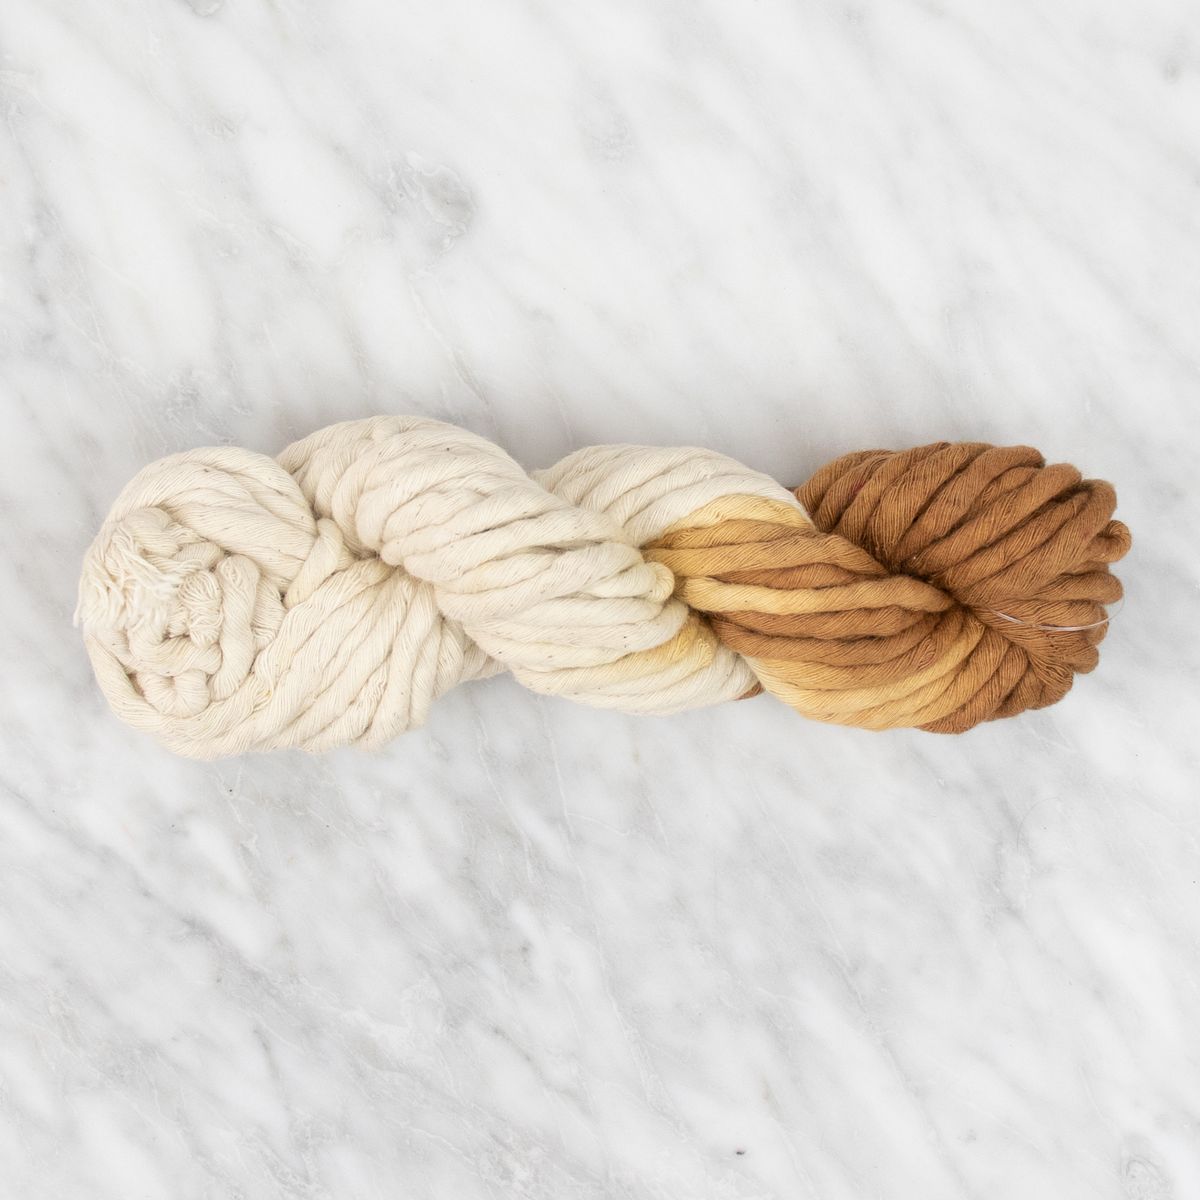 5mm Dip-Dyed Cotton String - Antique Gold - 100 grams